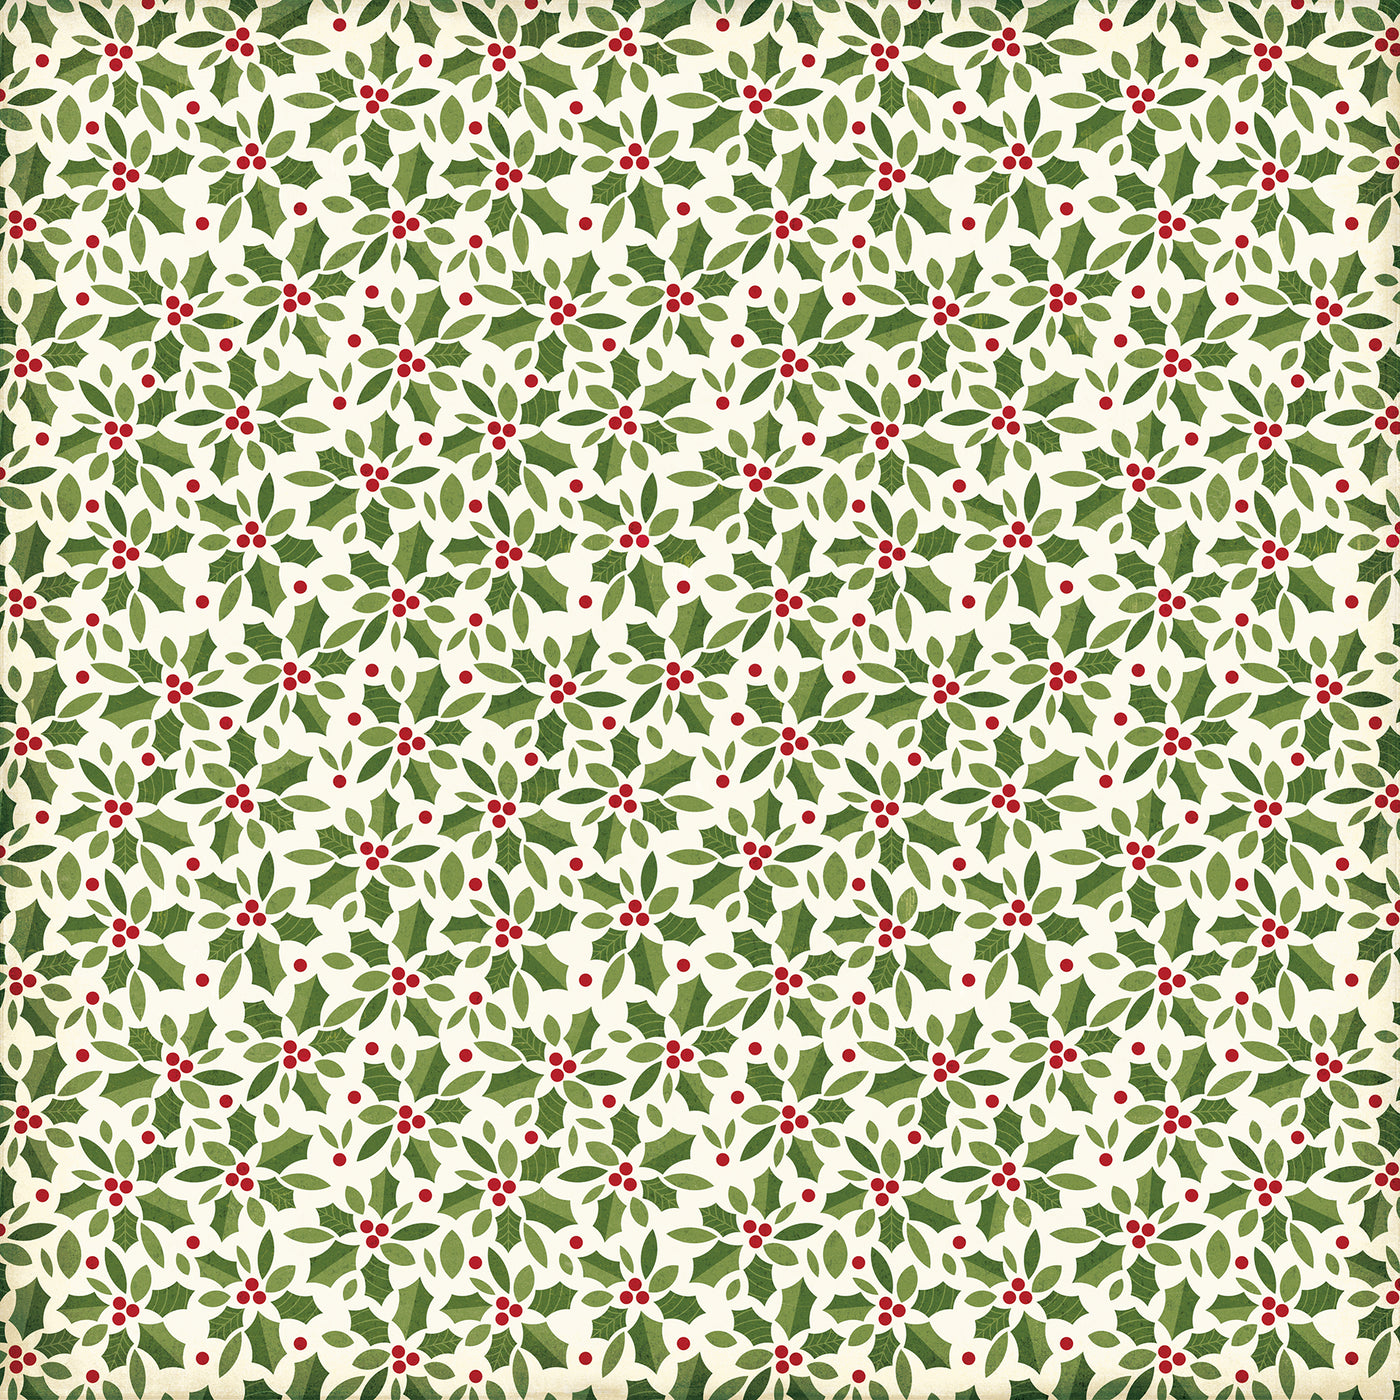 Side A - green holly with red berries all over an off-white background